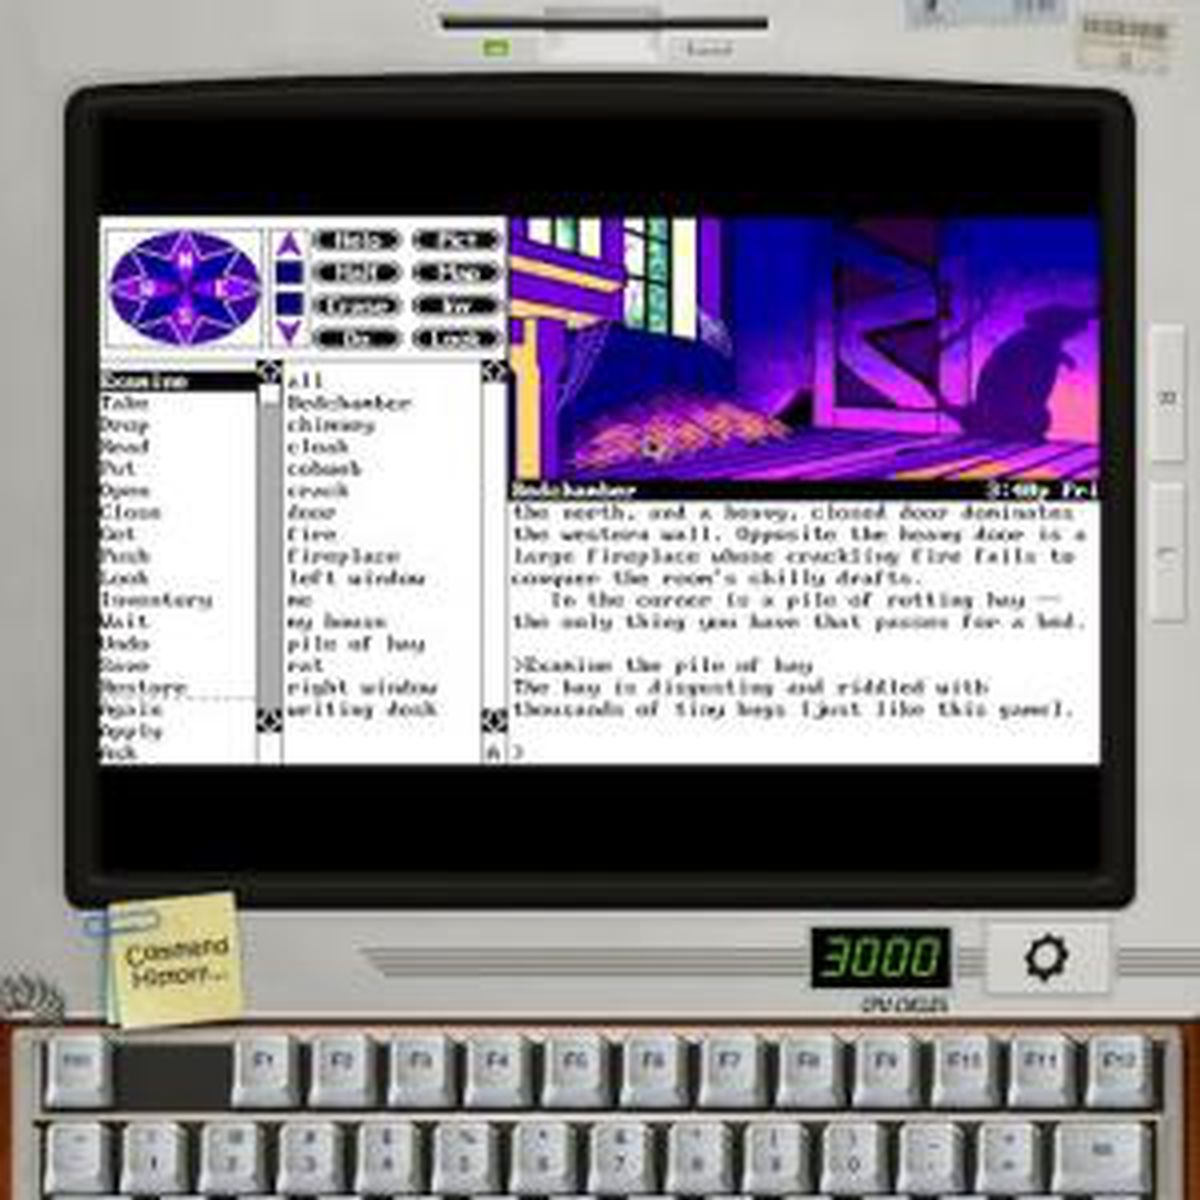 iDOS' Emulator Supports DOS and Windows 3.0 on iOS Devices [Update 